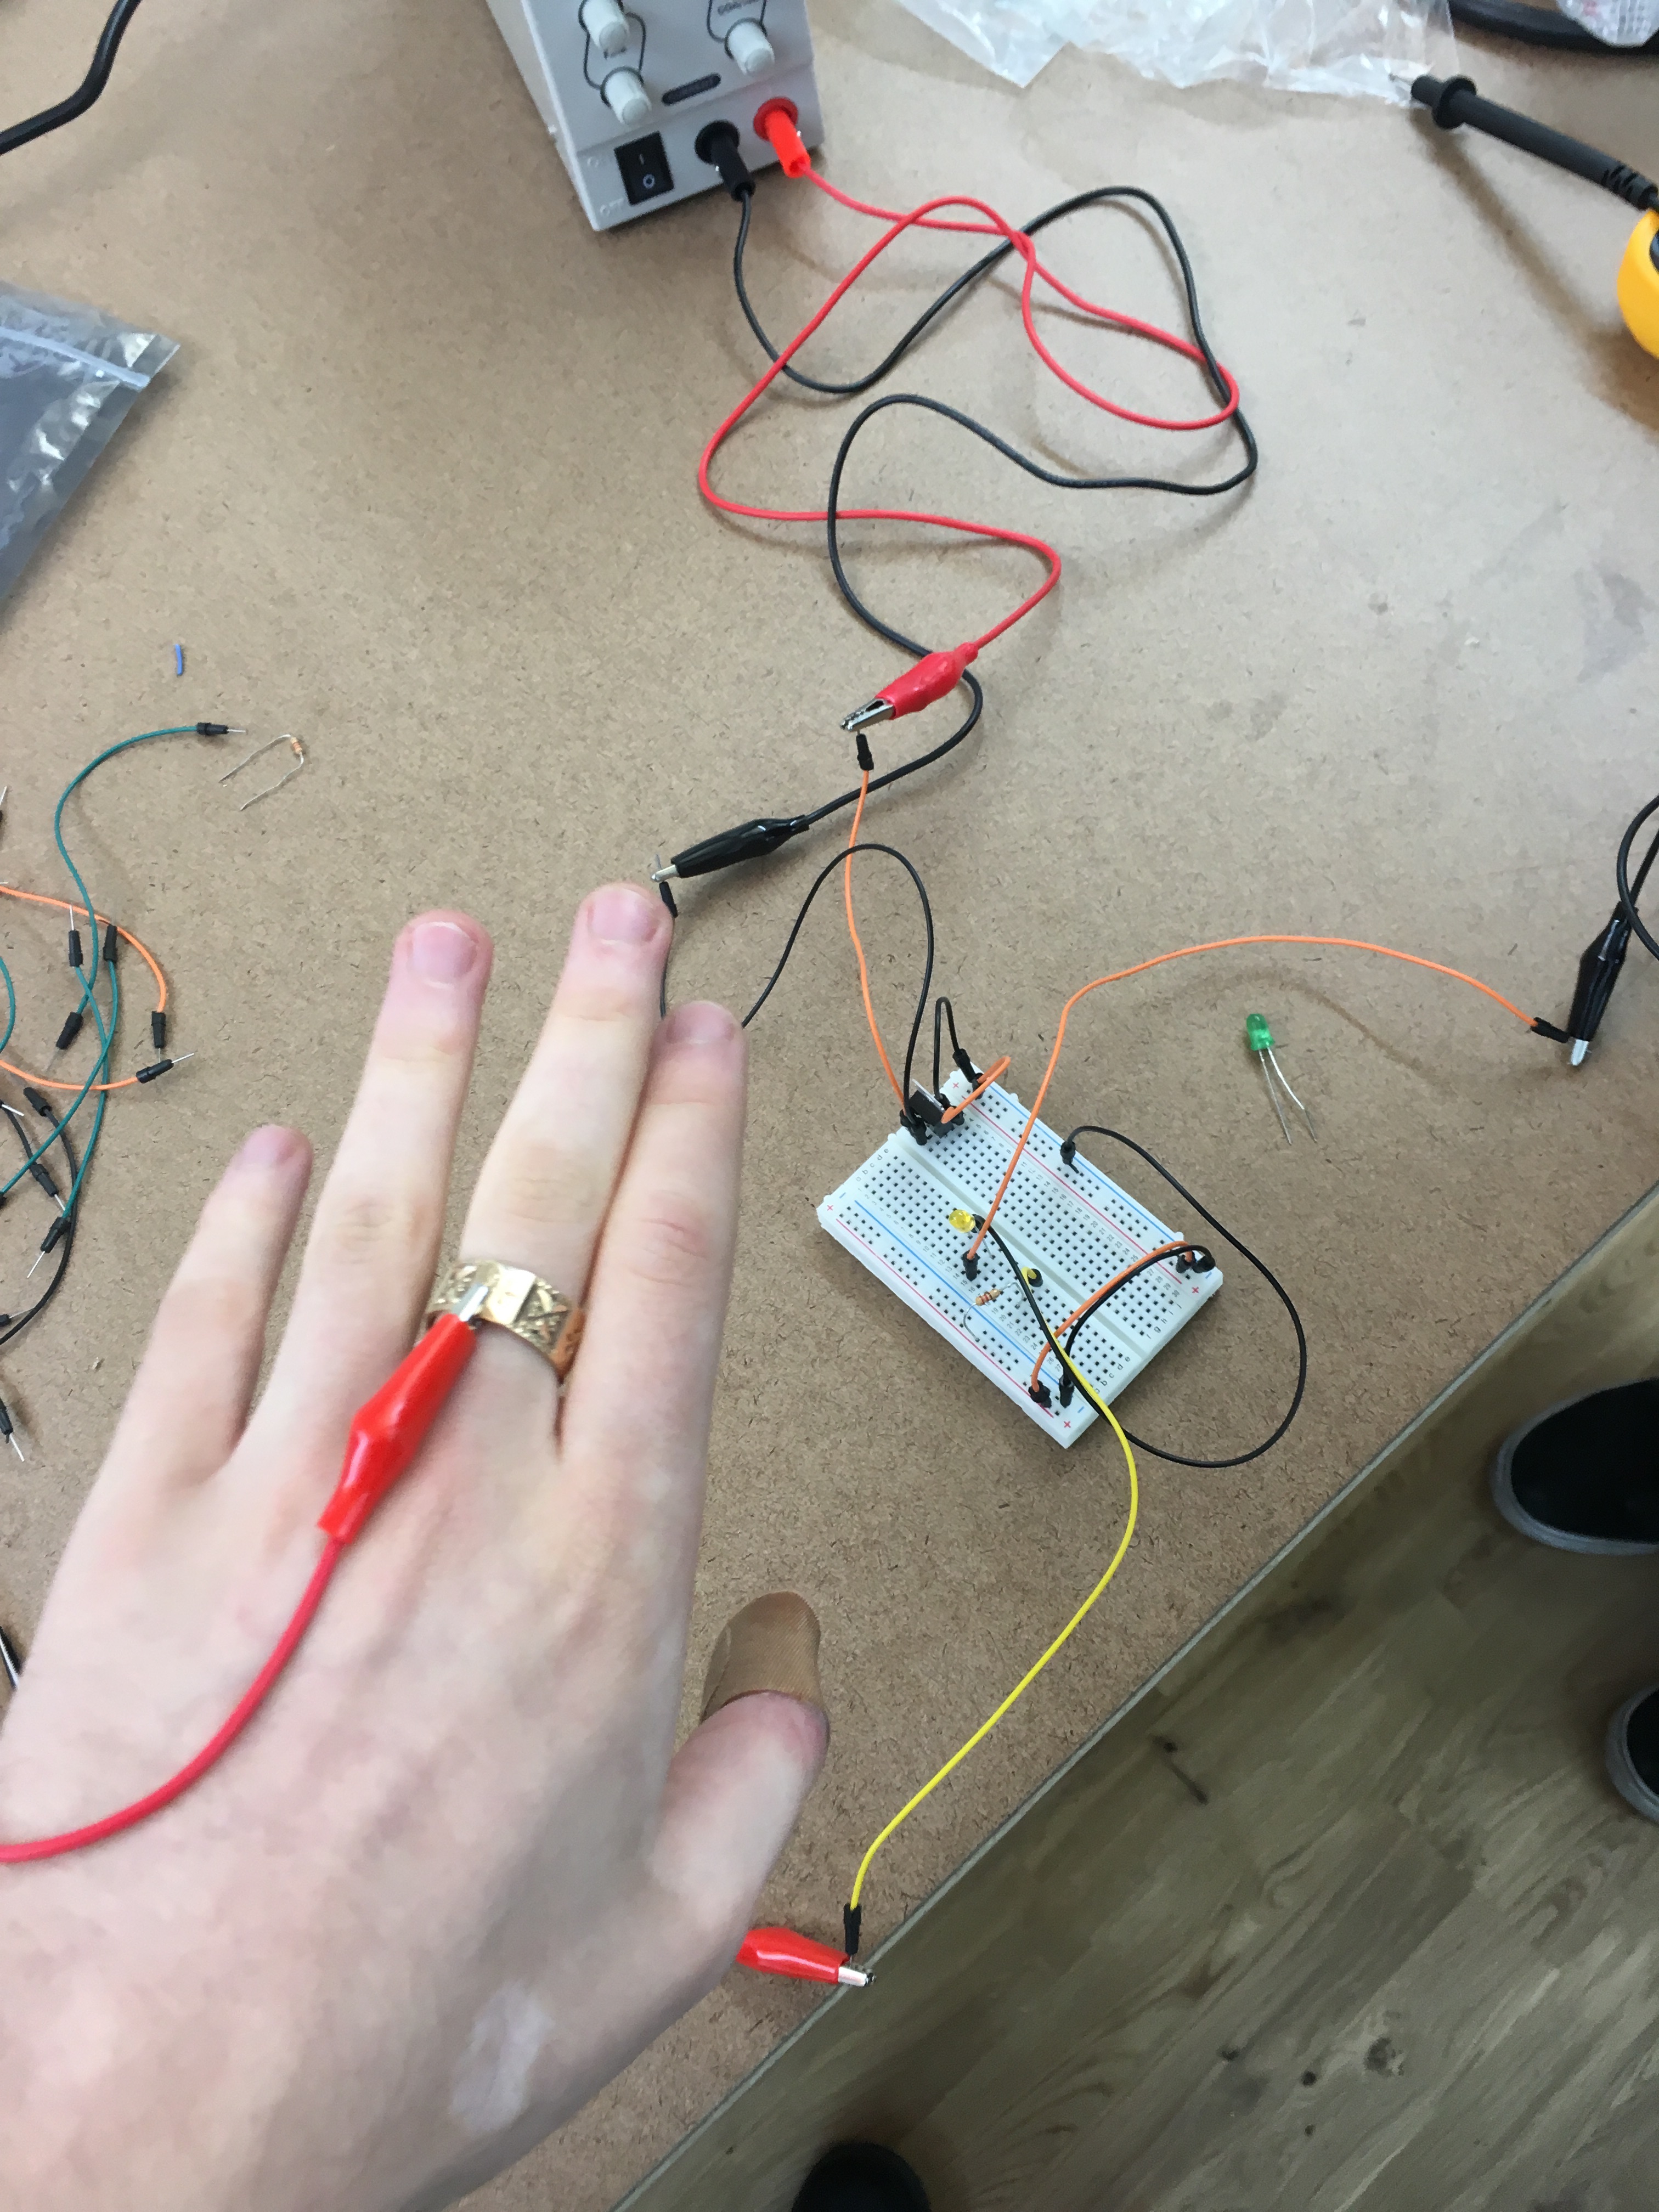 Foreground: Alligator clip connected to gold ring. Background: Breadboard setup for LED.